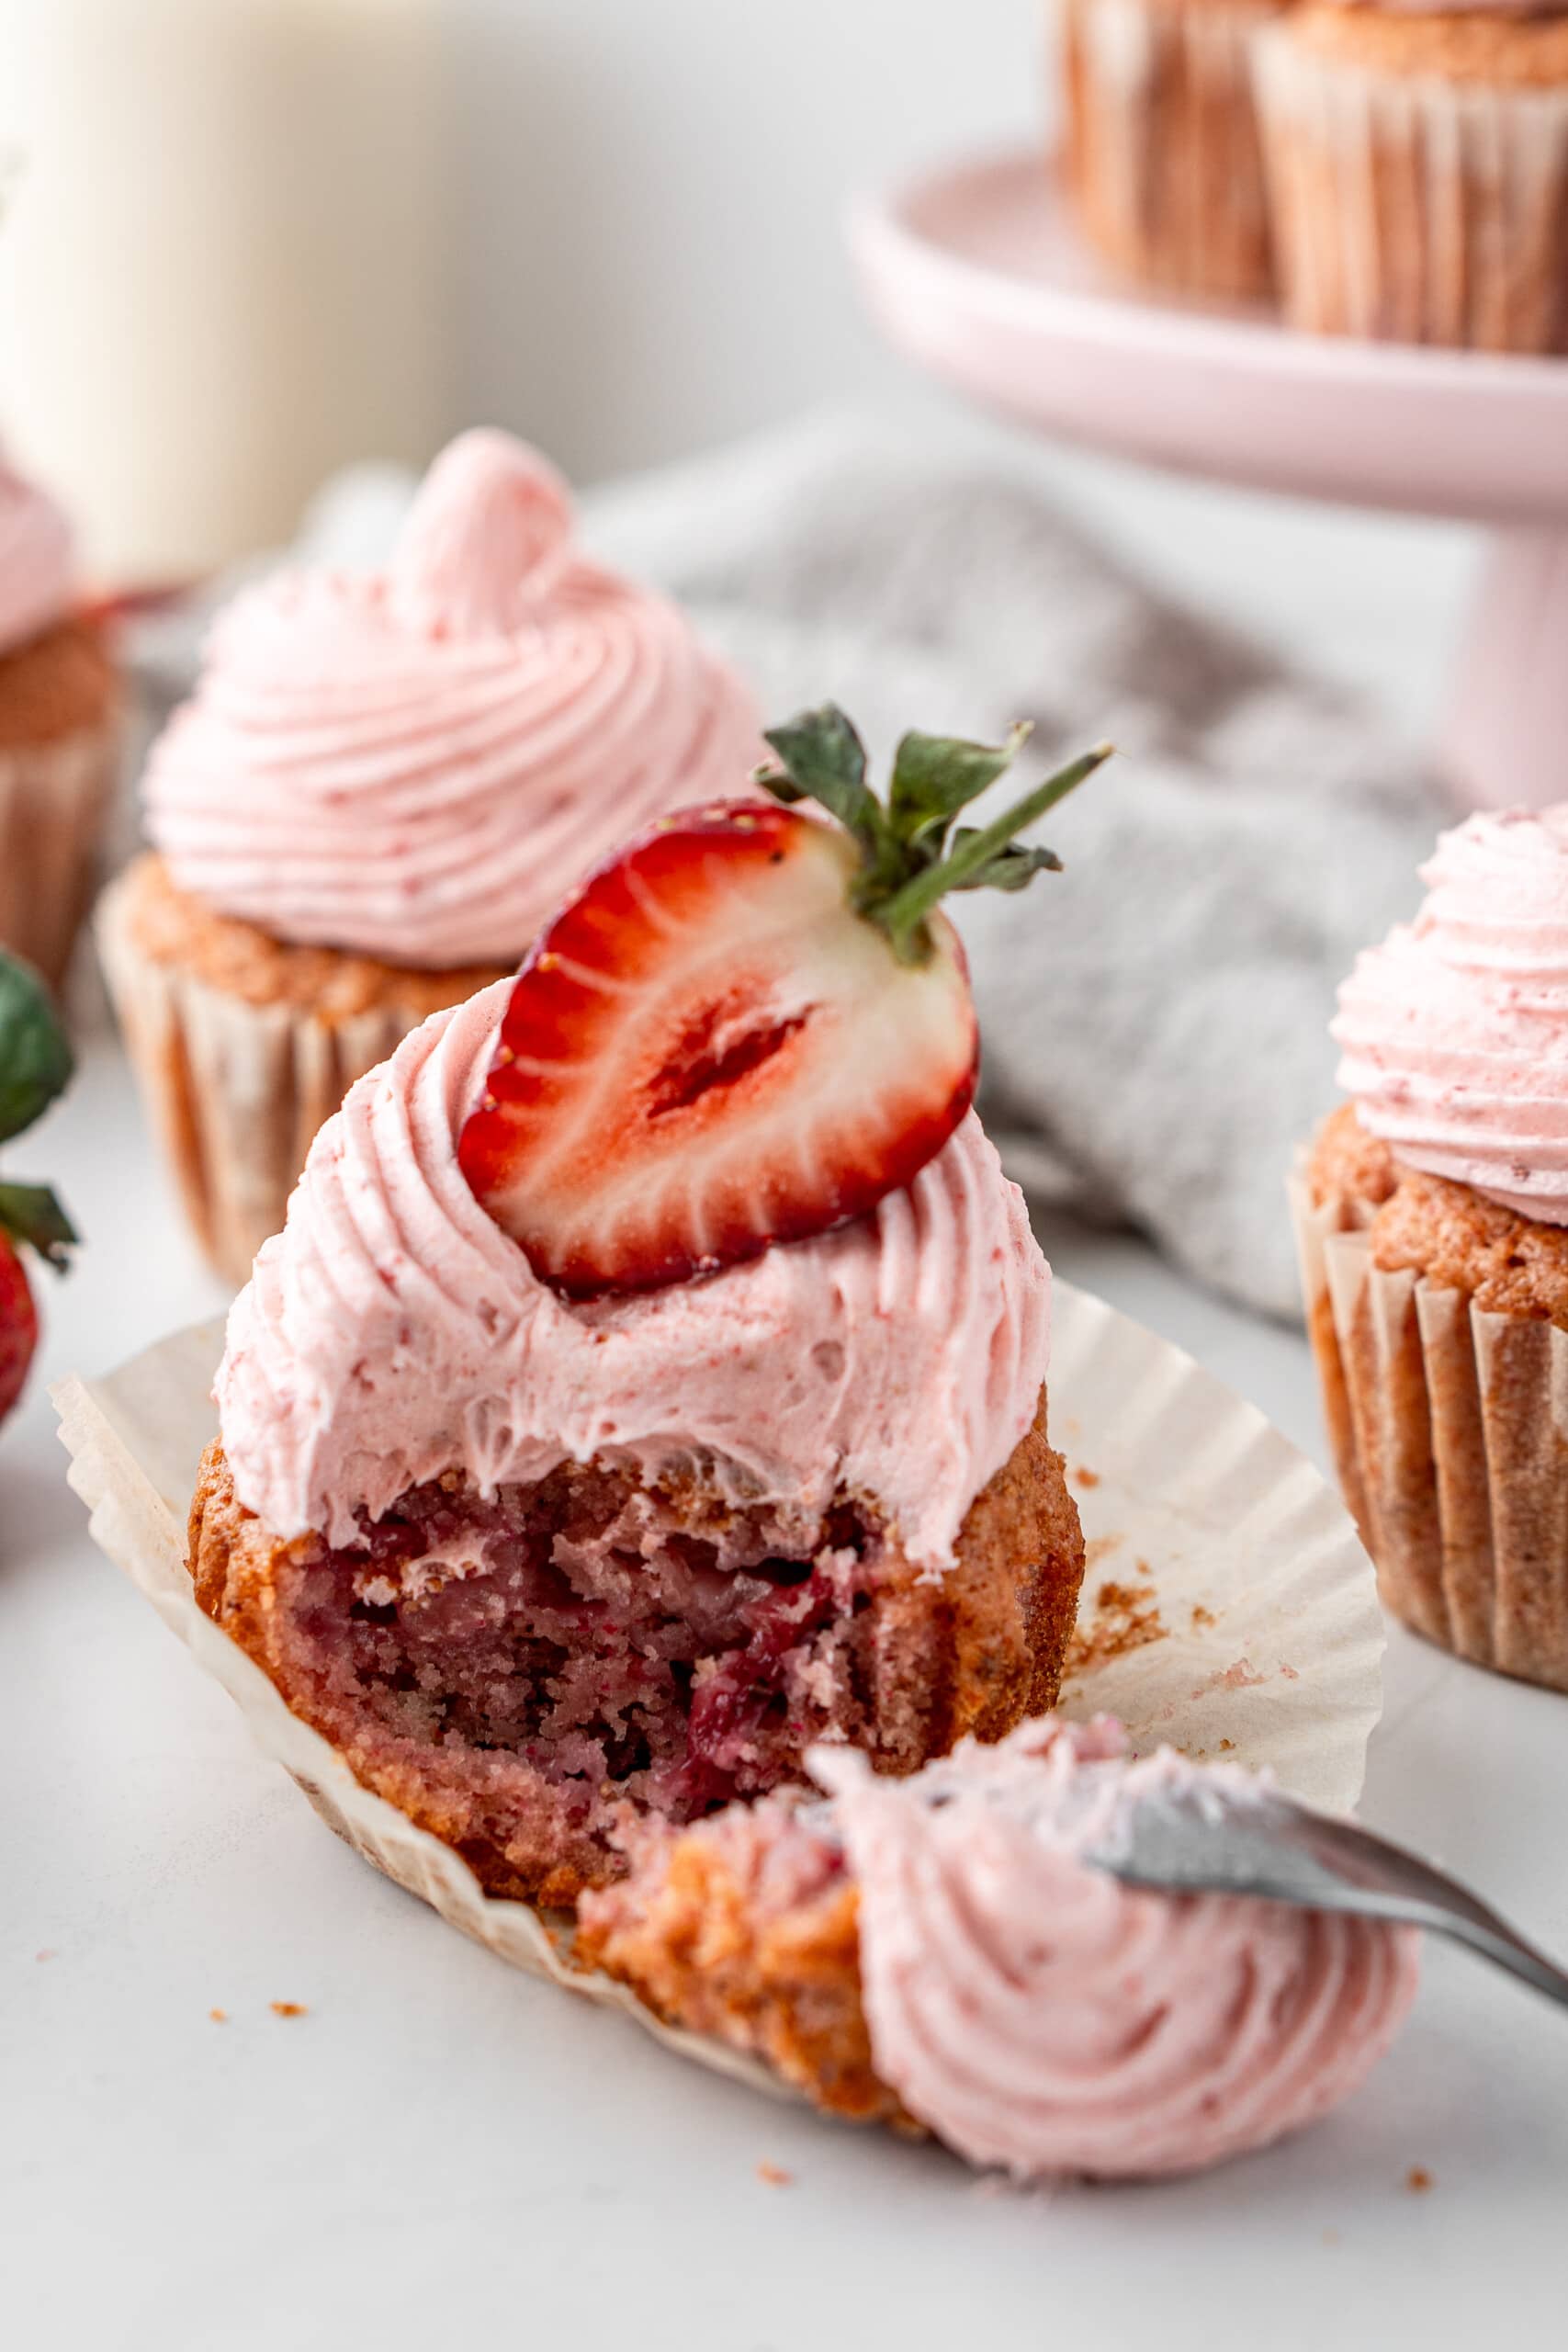 Strawberry cupcakes with a strawberry on top and a spoon taking a bite.